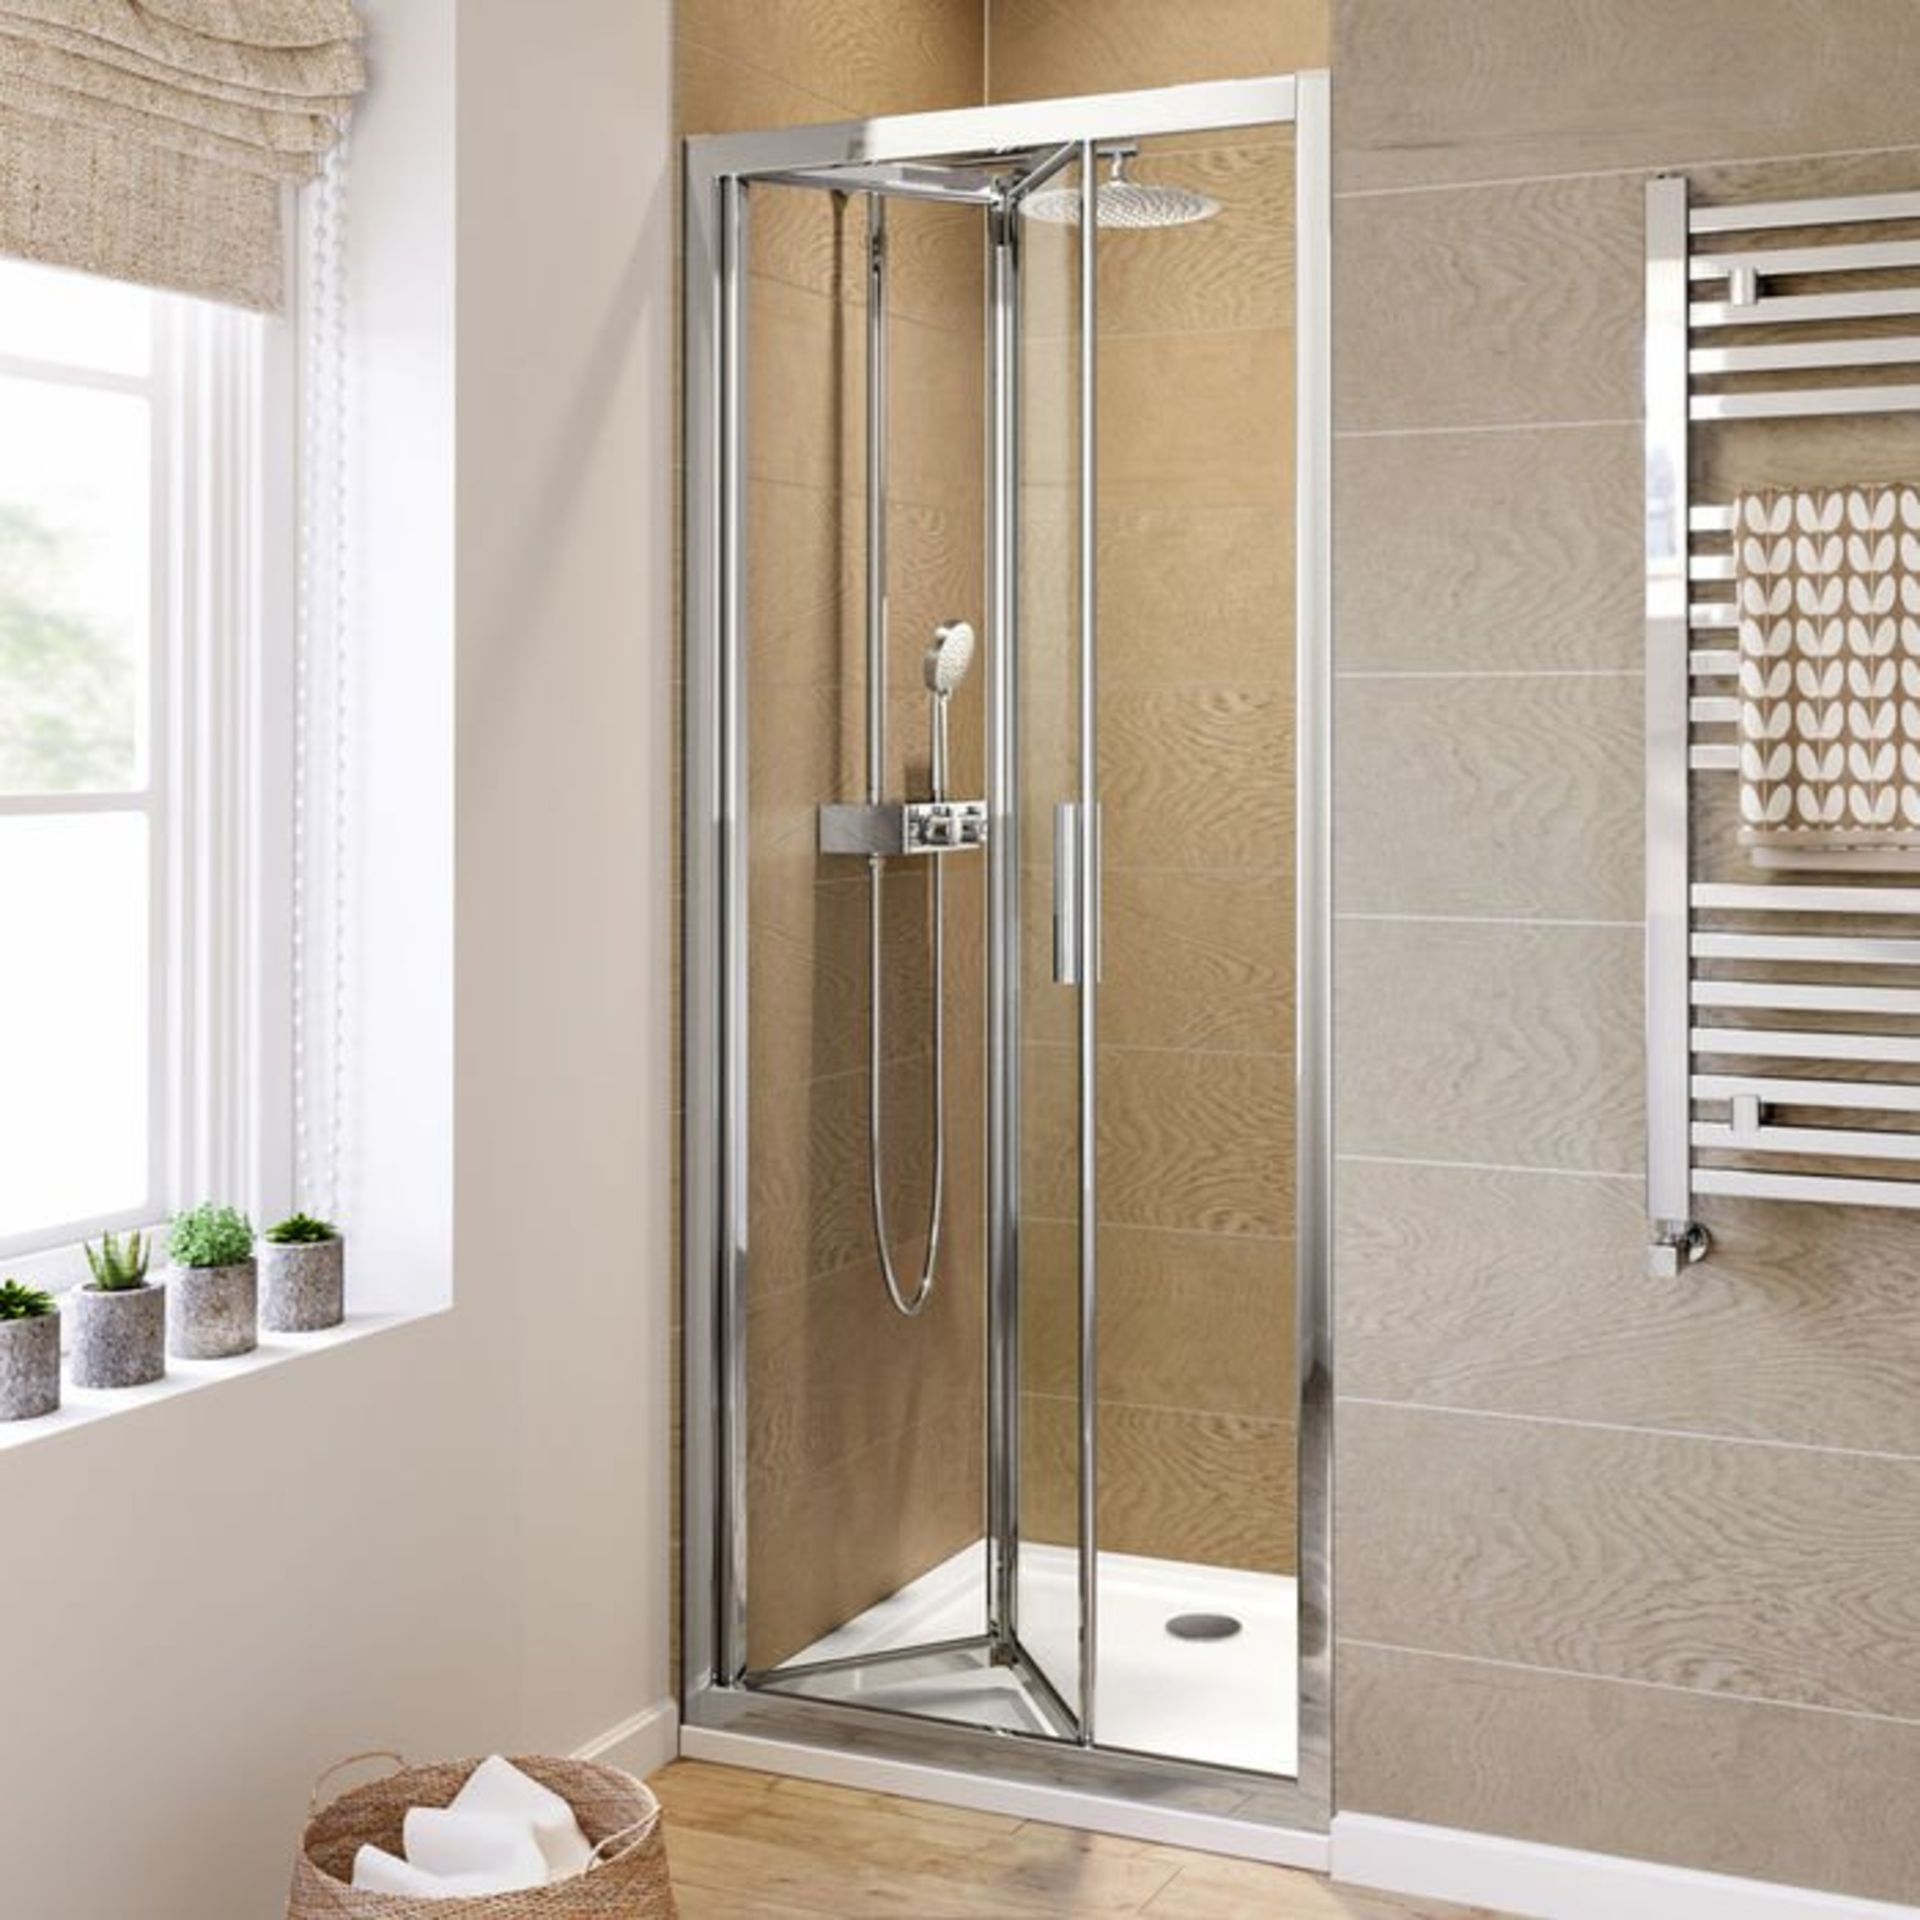 (G191) 800mm - 6mm - Elements EasyClean Bifold Shower Door. RRP £299.99. 6mm Safety Glass - Single- - Image 3 of 3